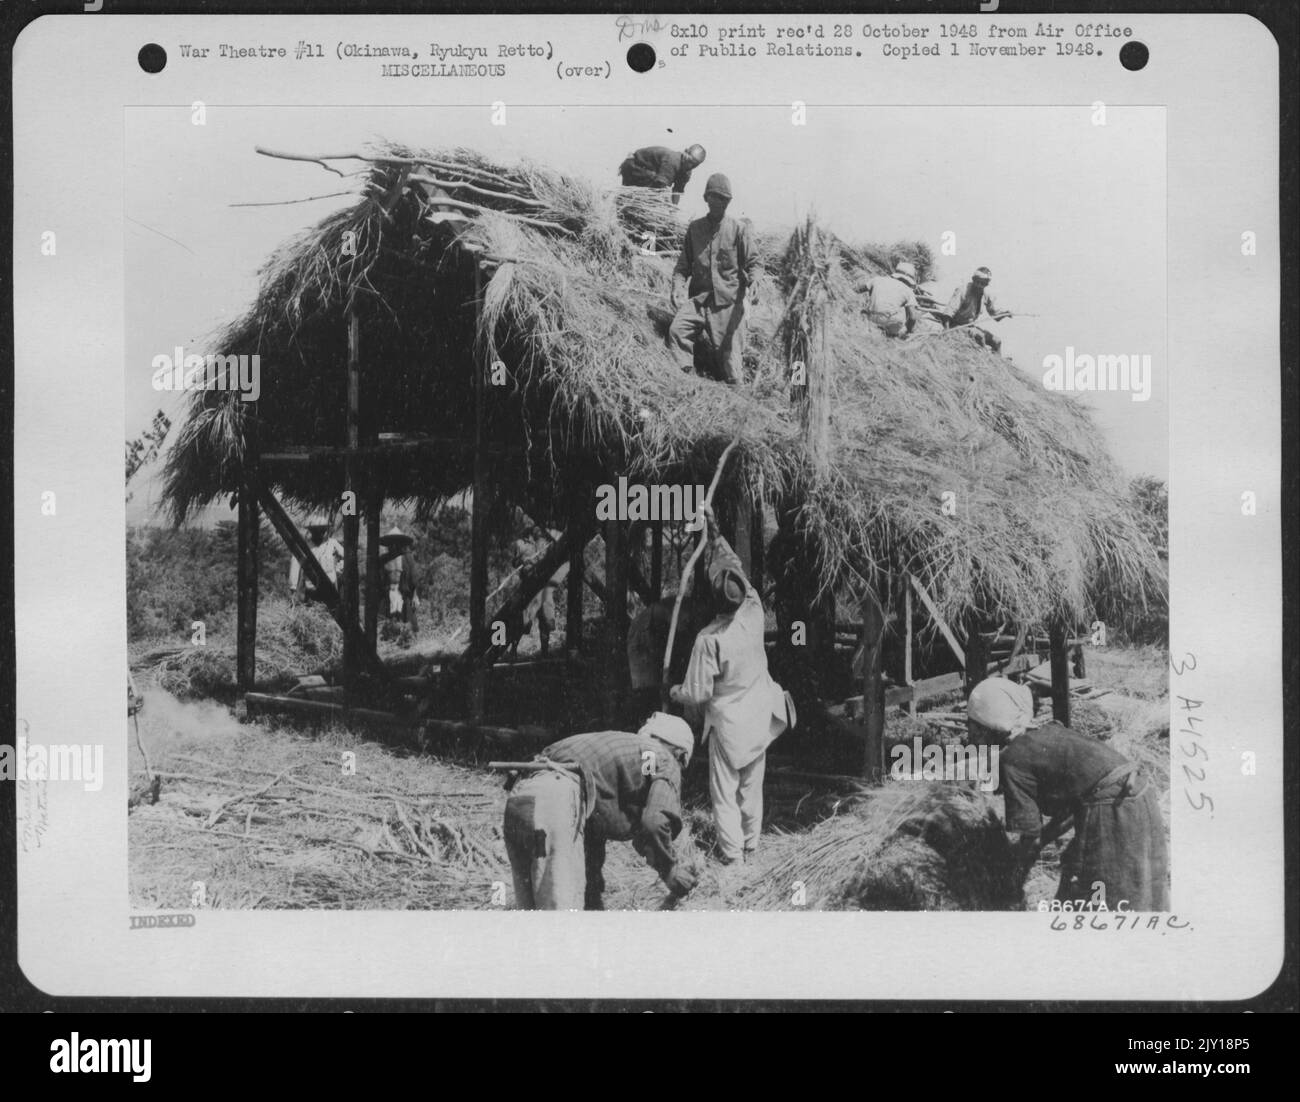 This Will Soon Be Home For A Native Family - Military Government Furnishes The Frames For Native Huts, But The Okinawans Do The Rest. Here A Group Is Busy Putting On The Thatched Roof. Okinawa, Ryukyu Retto. Stock Photo